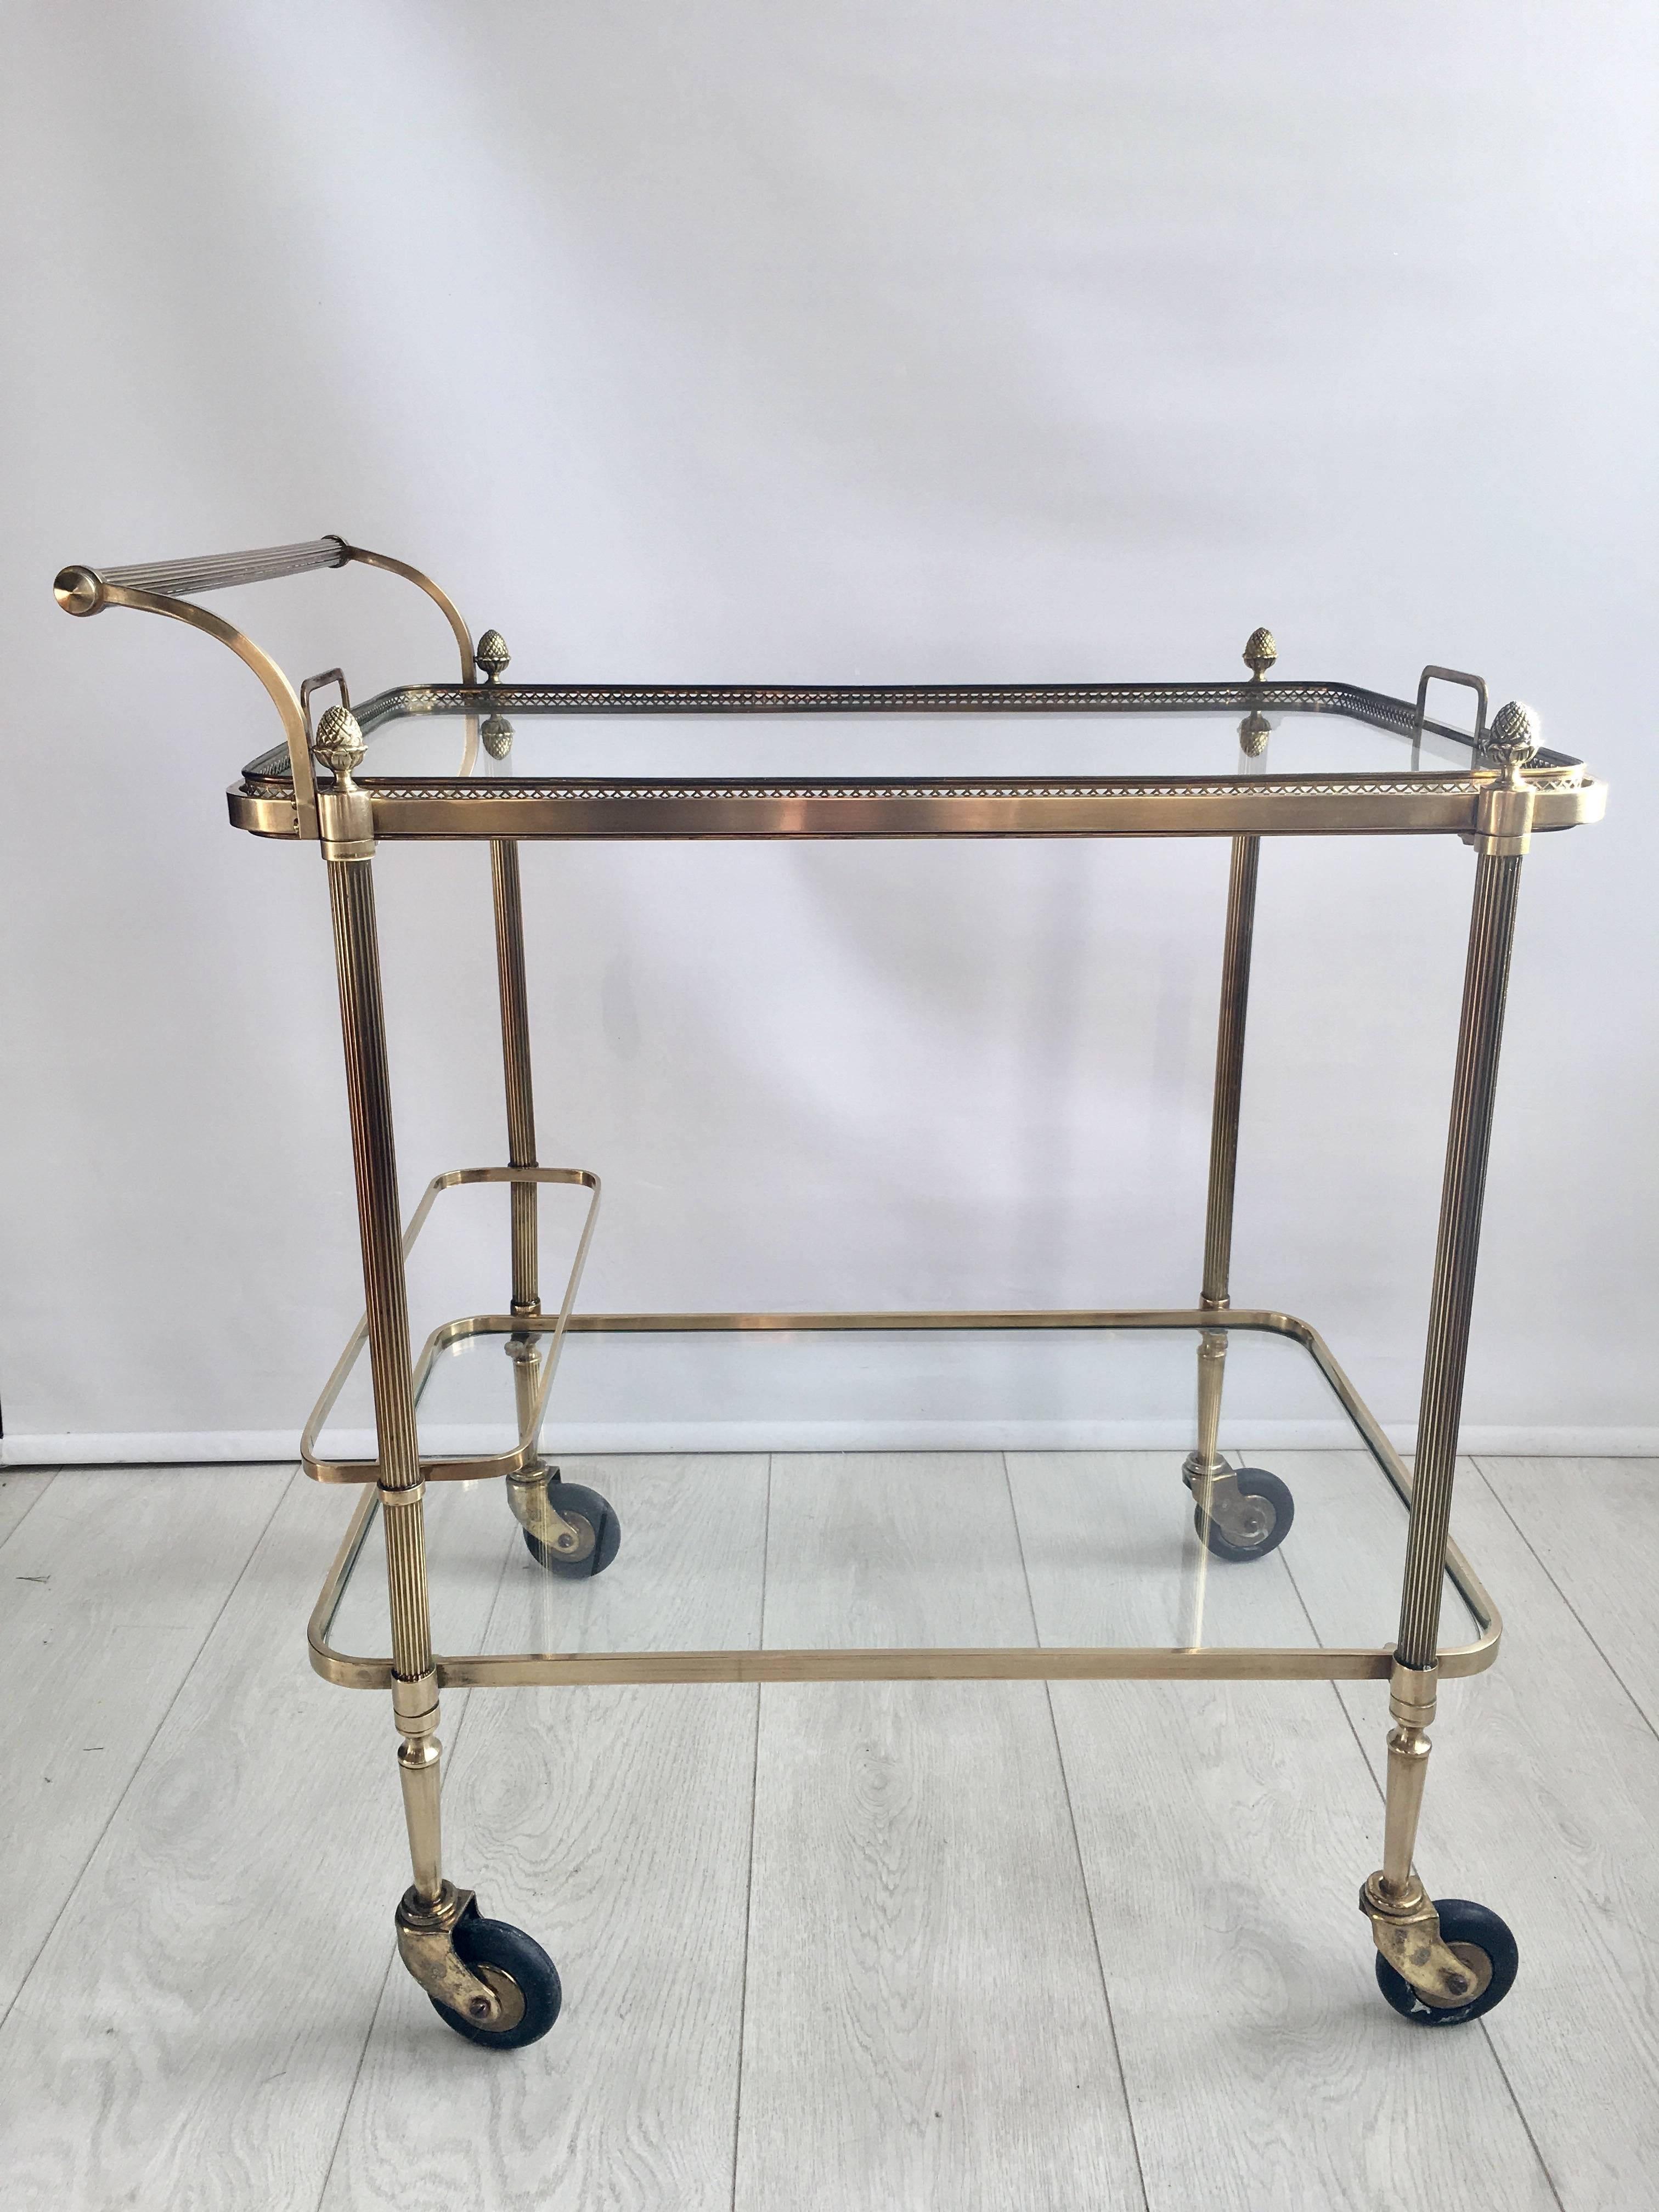 Lovely clean lines and quality to this vintage French drinks trolley in the style of Maison Baguès

Polished brass frame with lift off top tray and bottle holder to the lower tier

Top tray measures 60cm wide by 44cm deep and stands 64cm to